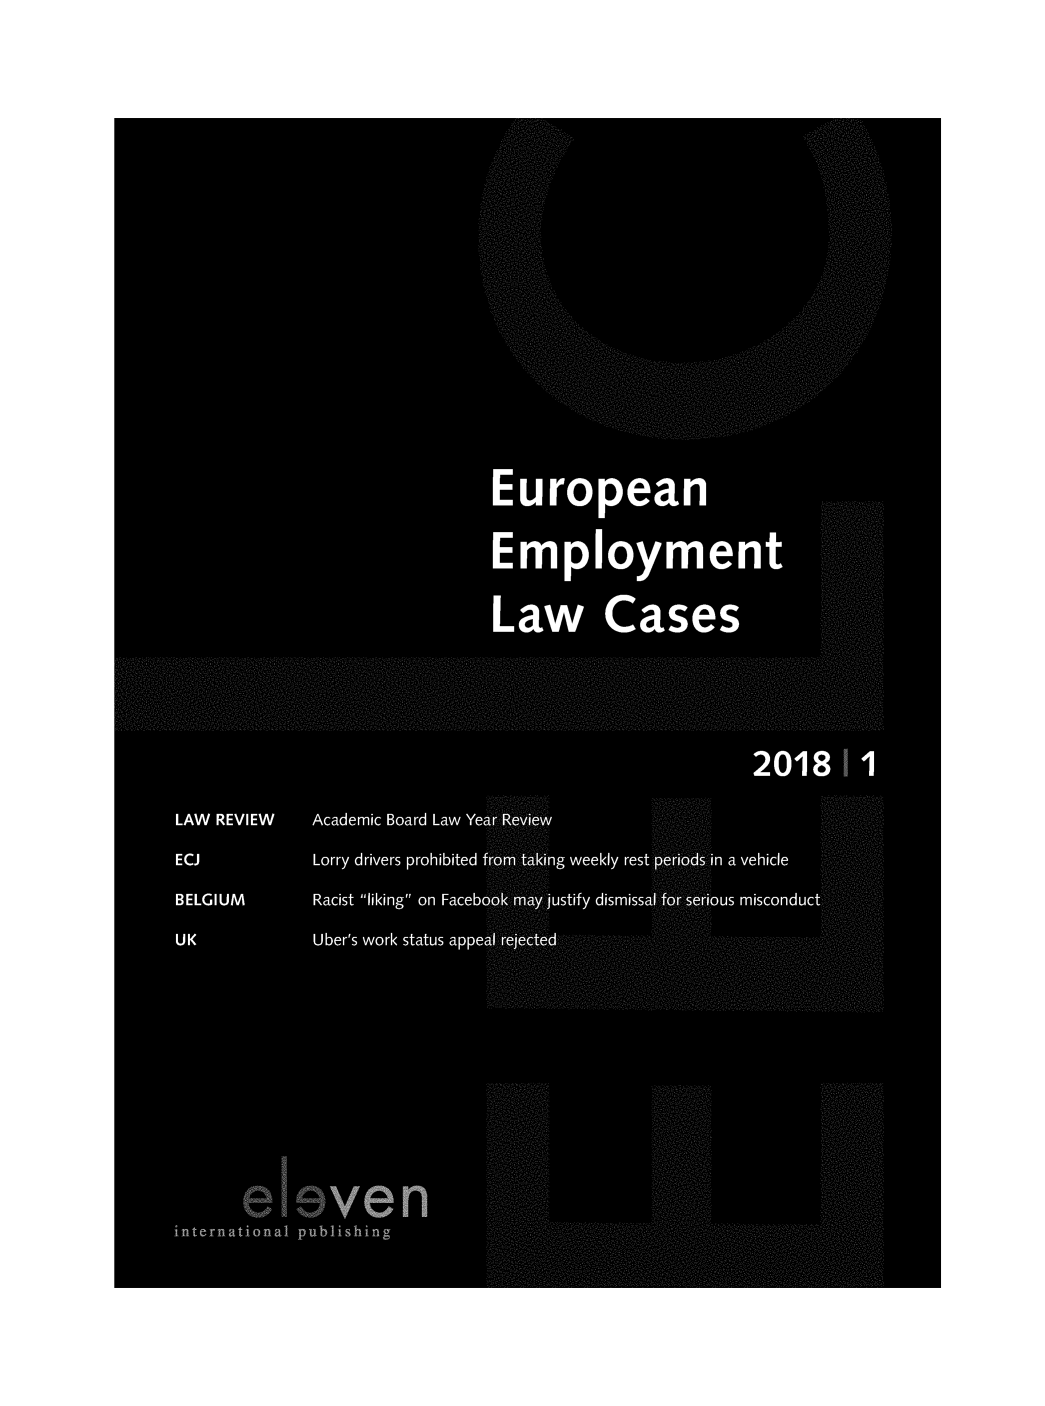 handle is hein.journals/eelc2018 and id is 1 raw text is: 












                                    ... .. . ... . . .










                                 European


                                 Employment

                                                                ................
                                 Law Cases




. . . . . . . . . . . . . . . ........

                                                       201811

     LAW REVIEW      Academic Board Law Yeaf, Rbvlew
     ECJ         Lorry drivers prohibited rqM.Ak per..!
                                       weekly rest ;,.jn a vehicle

     BELGIUM          Racist liking on  Face b6'.-k',-'..  tif  I ism issatf.b..f    -oncluct  %, ,,,  ,

     U K         U ber's work status aDDeal.'T,.6je,,,













           eleven
     international publishing


